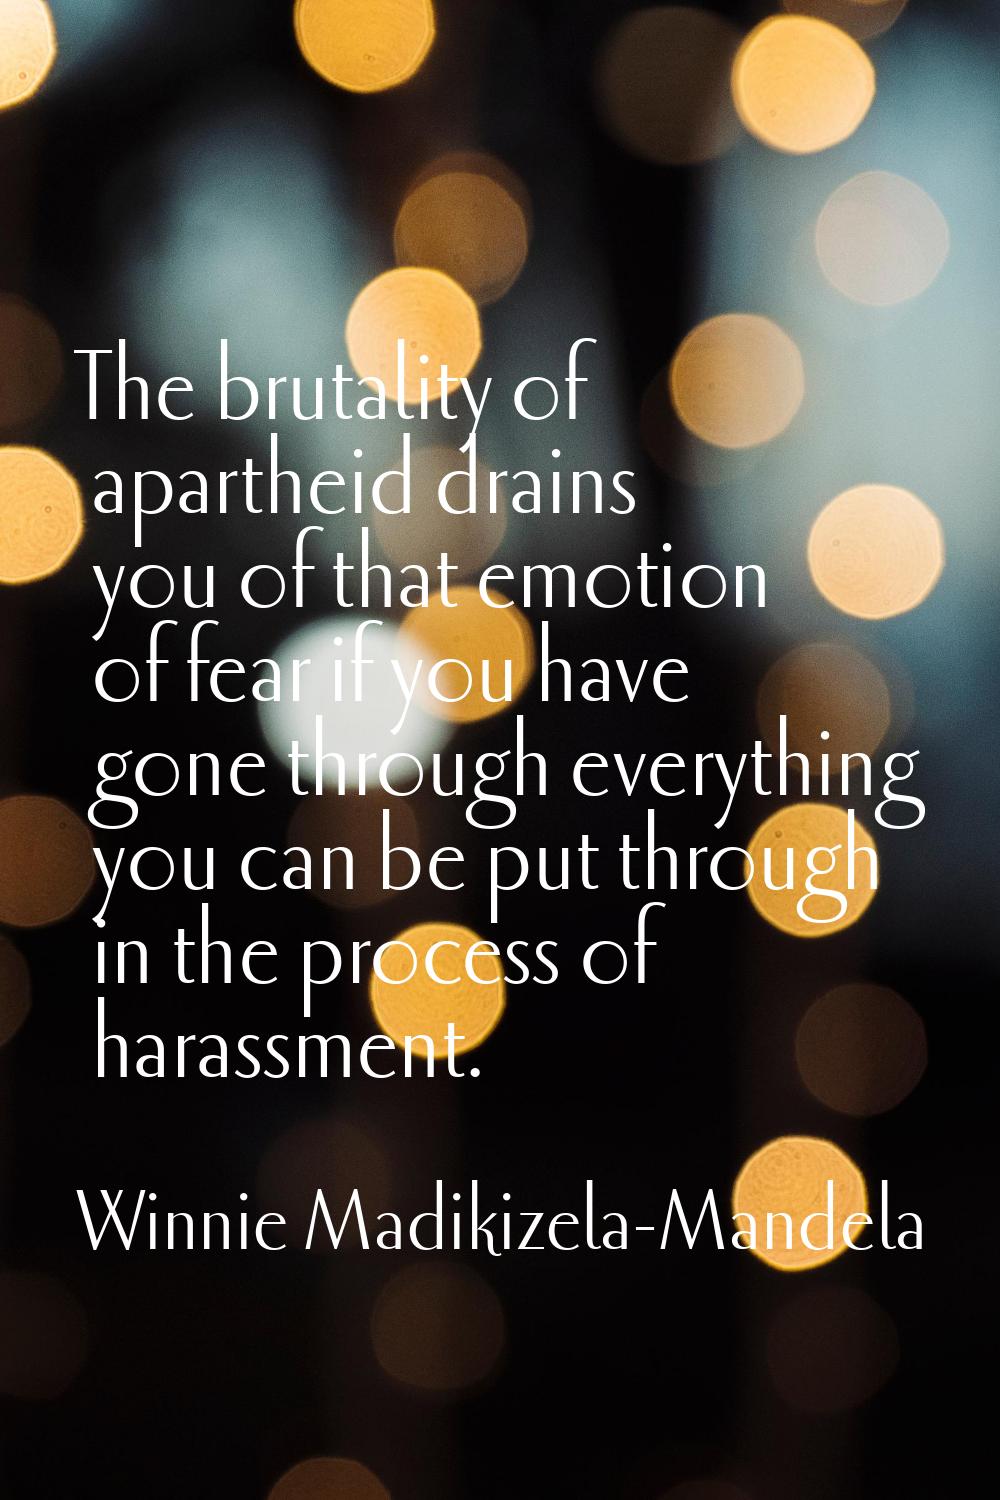 The brutality of apartheid drains you of that emotion of fear if you have gone through everything y